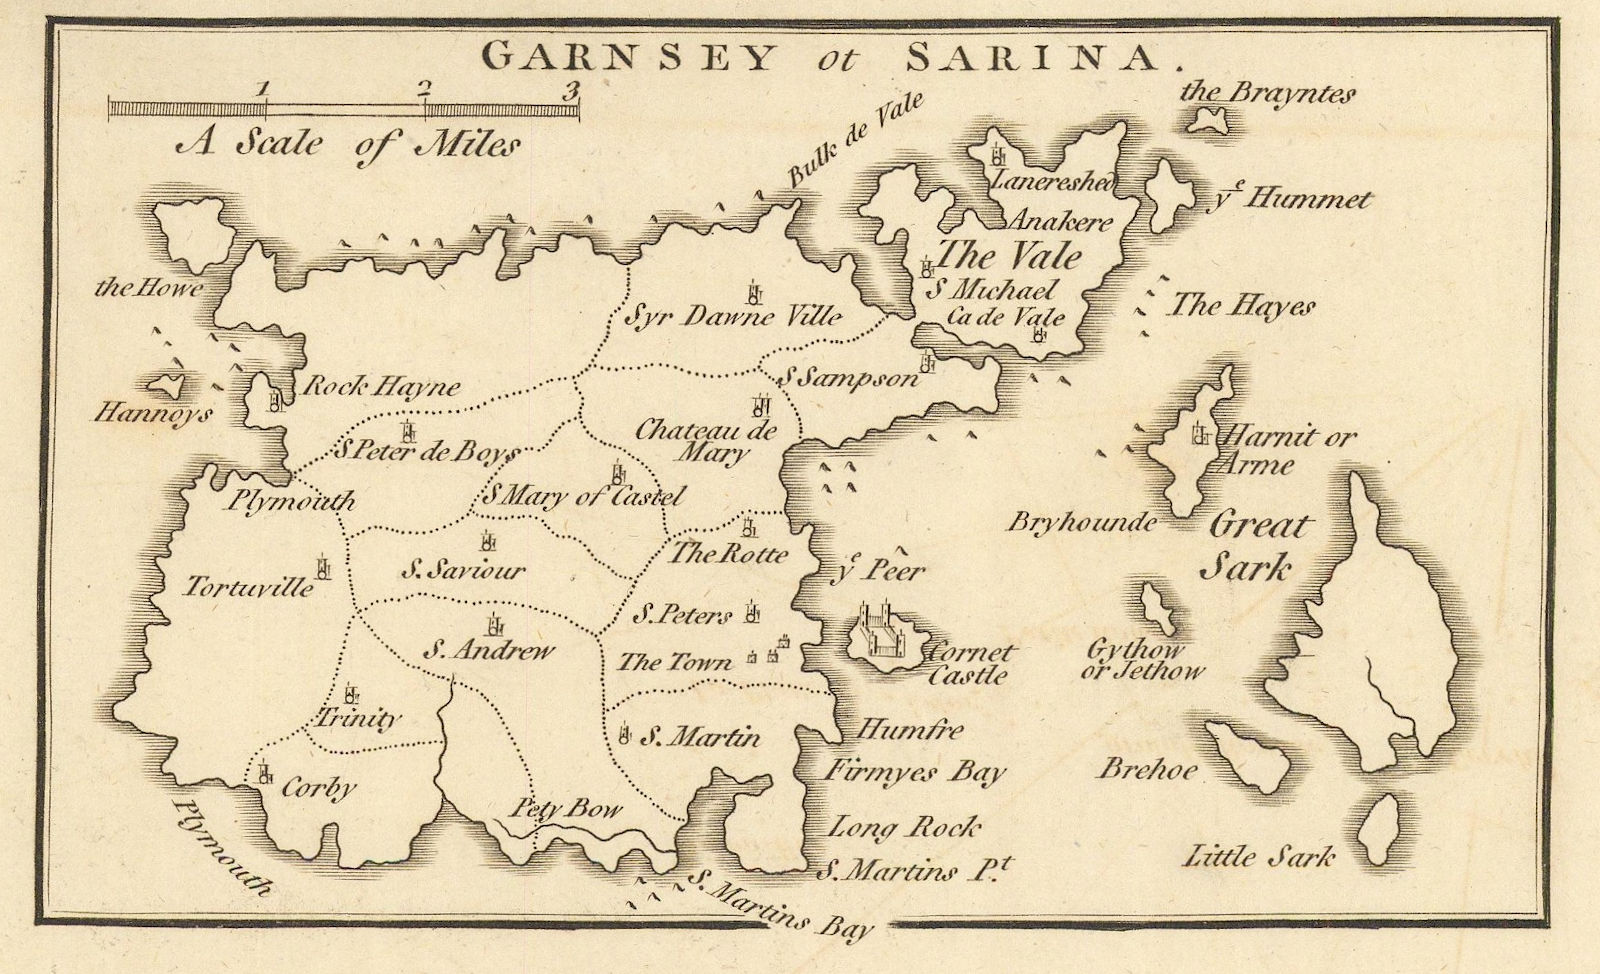 "Garnsey or Sarina" by John CARY. Guernsey, Channel Islands. SMALL 1806 map